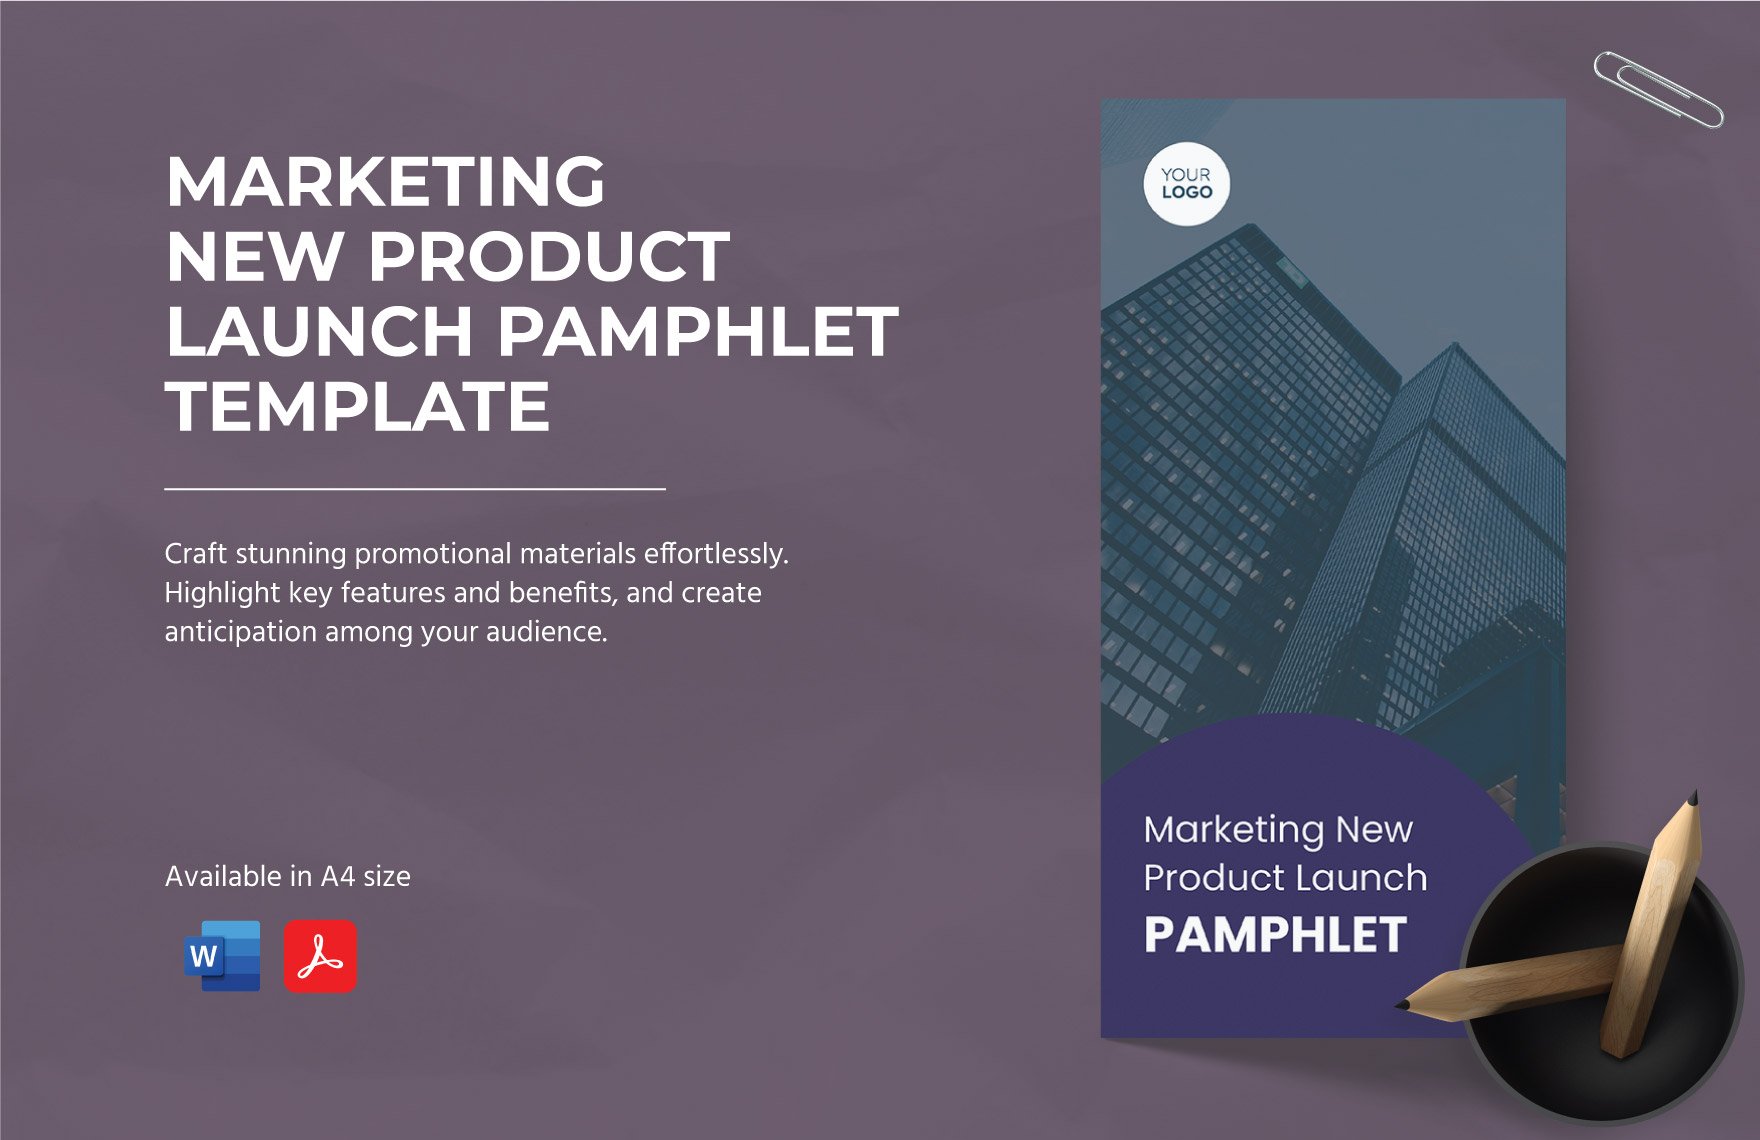 Marketing New Product Launch Pamphlet Template